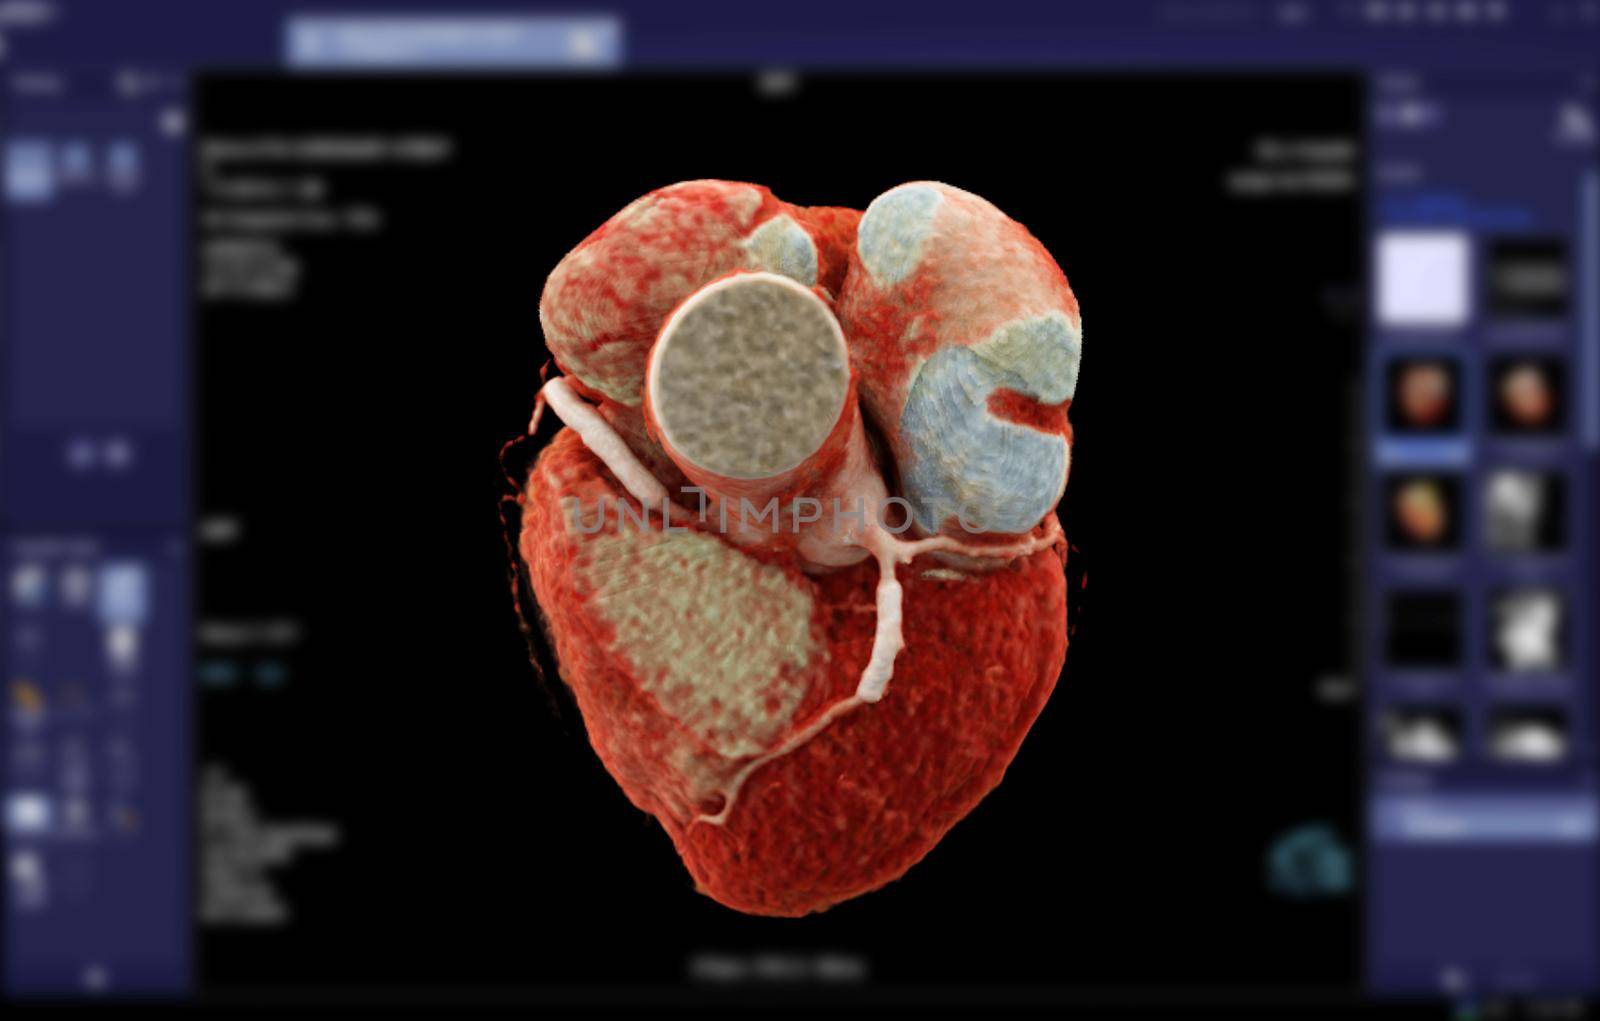 CTA Coronary artery 3D rendering image for finding coronary artery disease on blurred screen background.